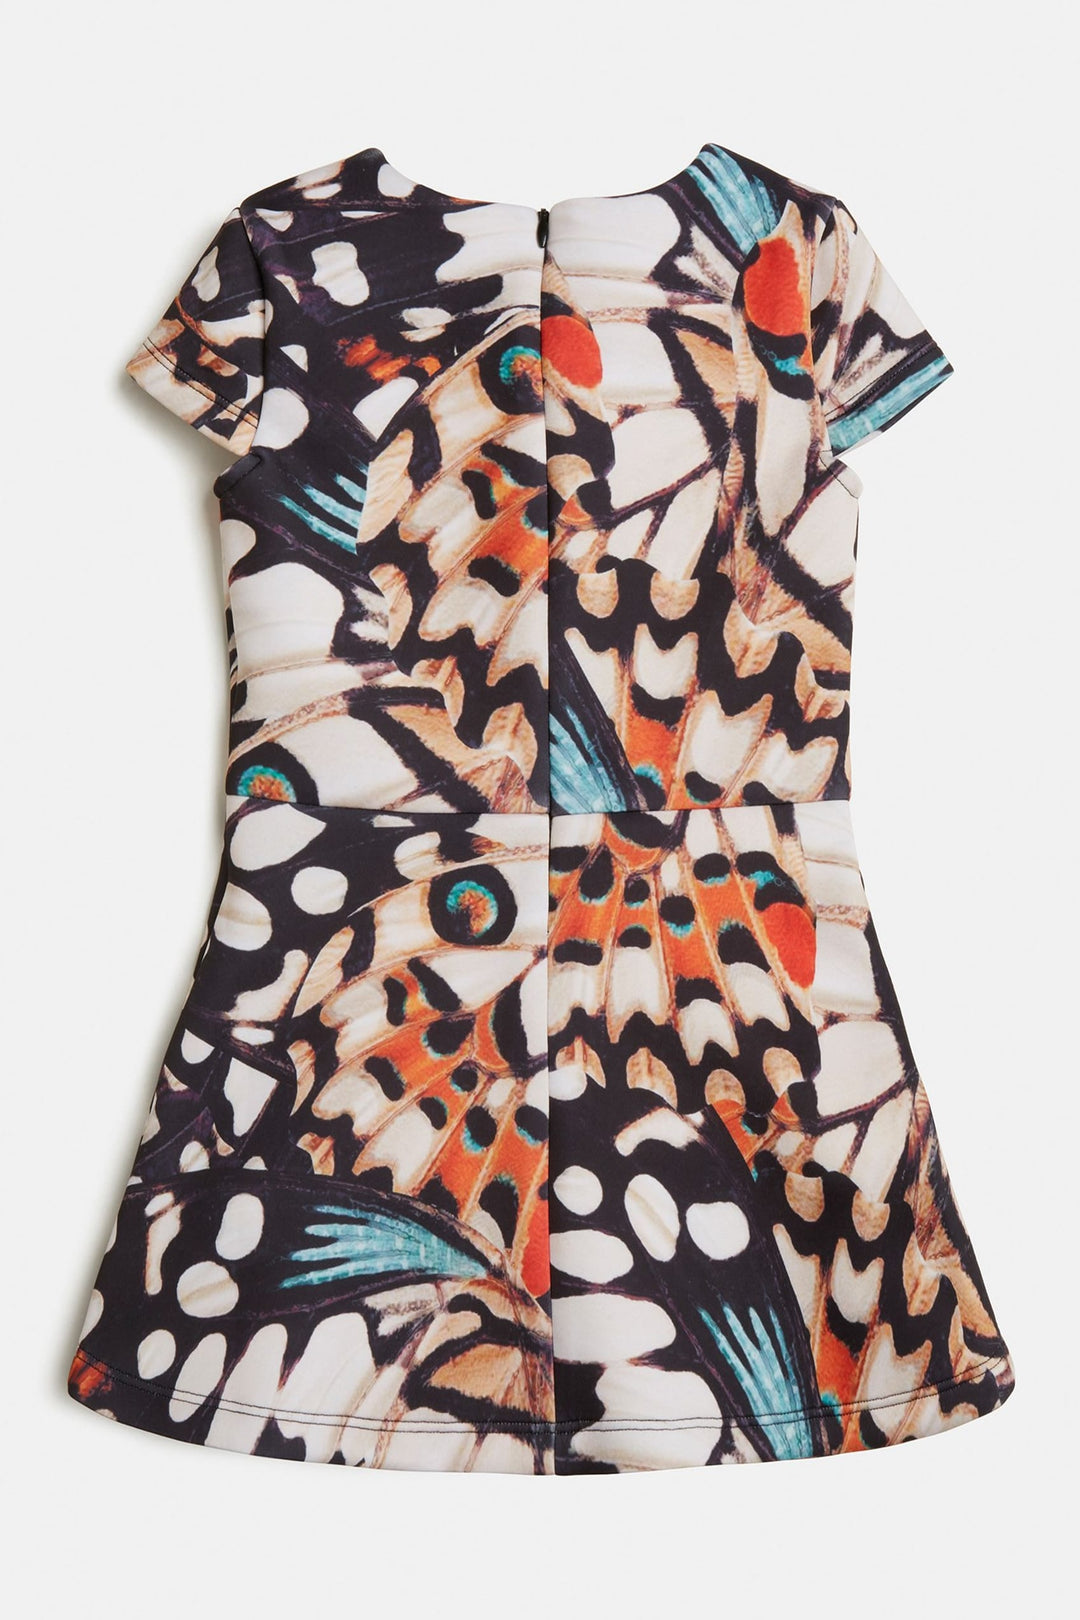 TODDLER GIRL-All over print dress - Guess